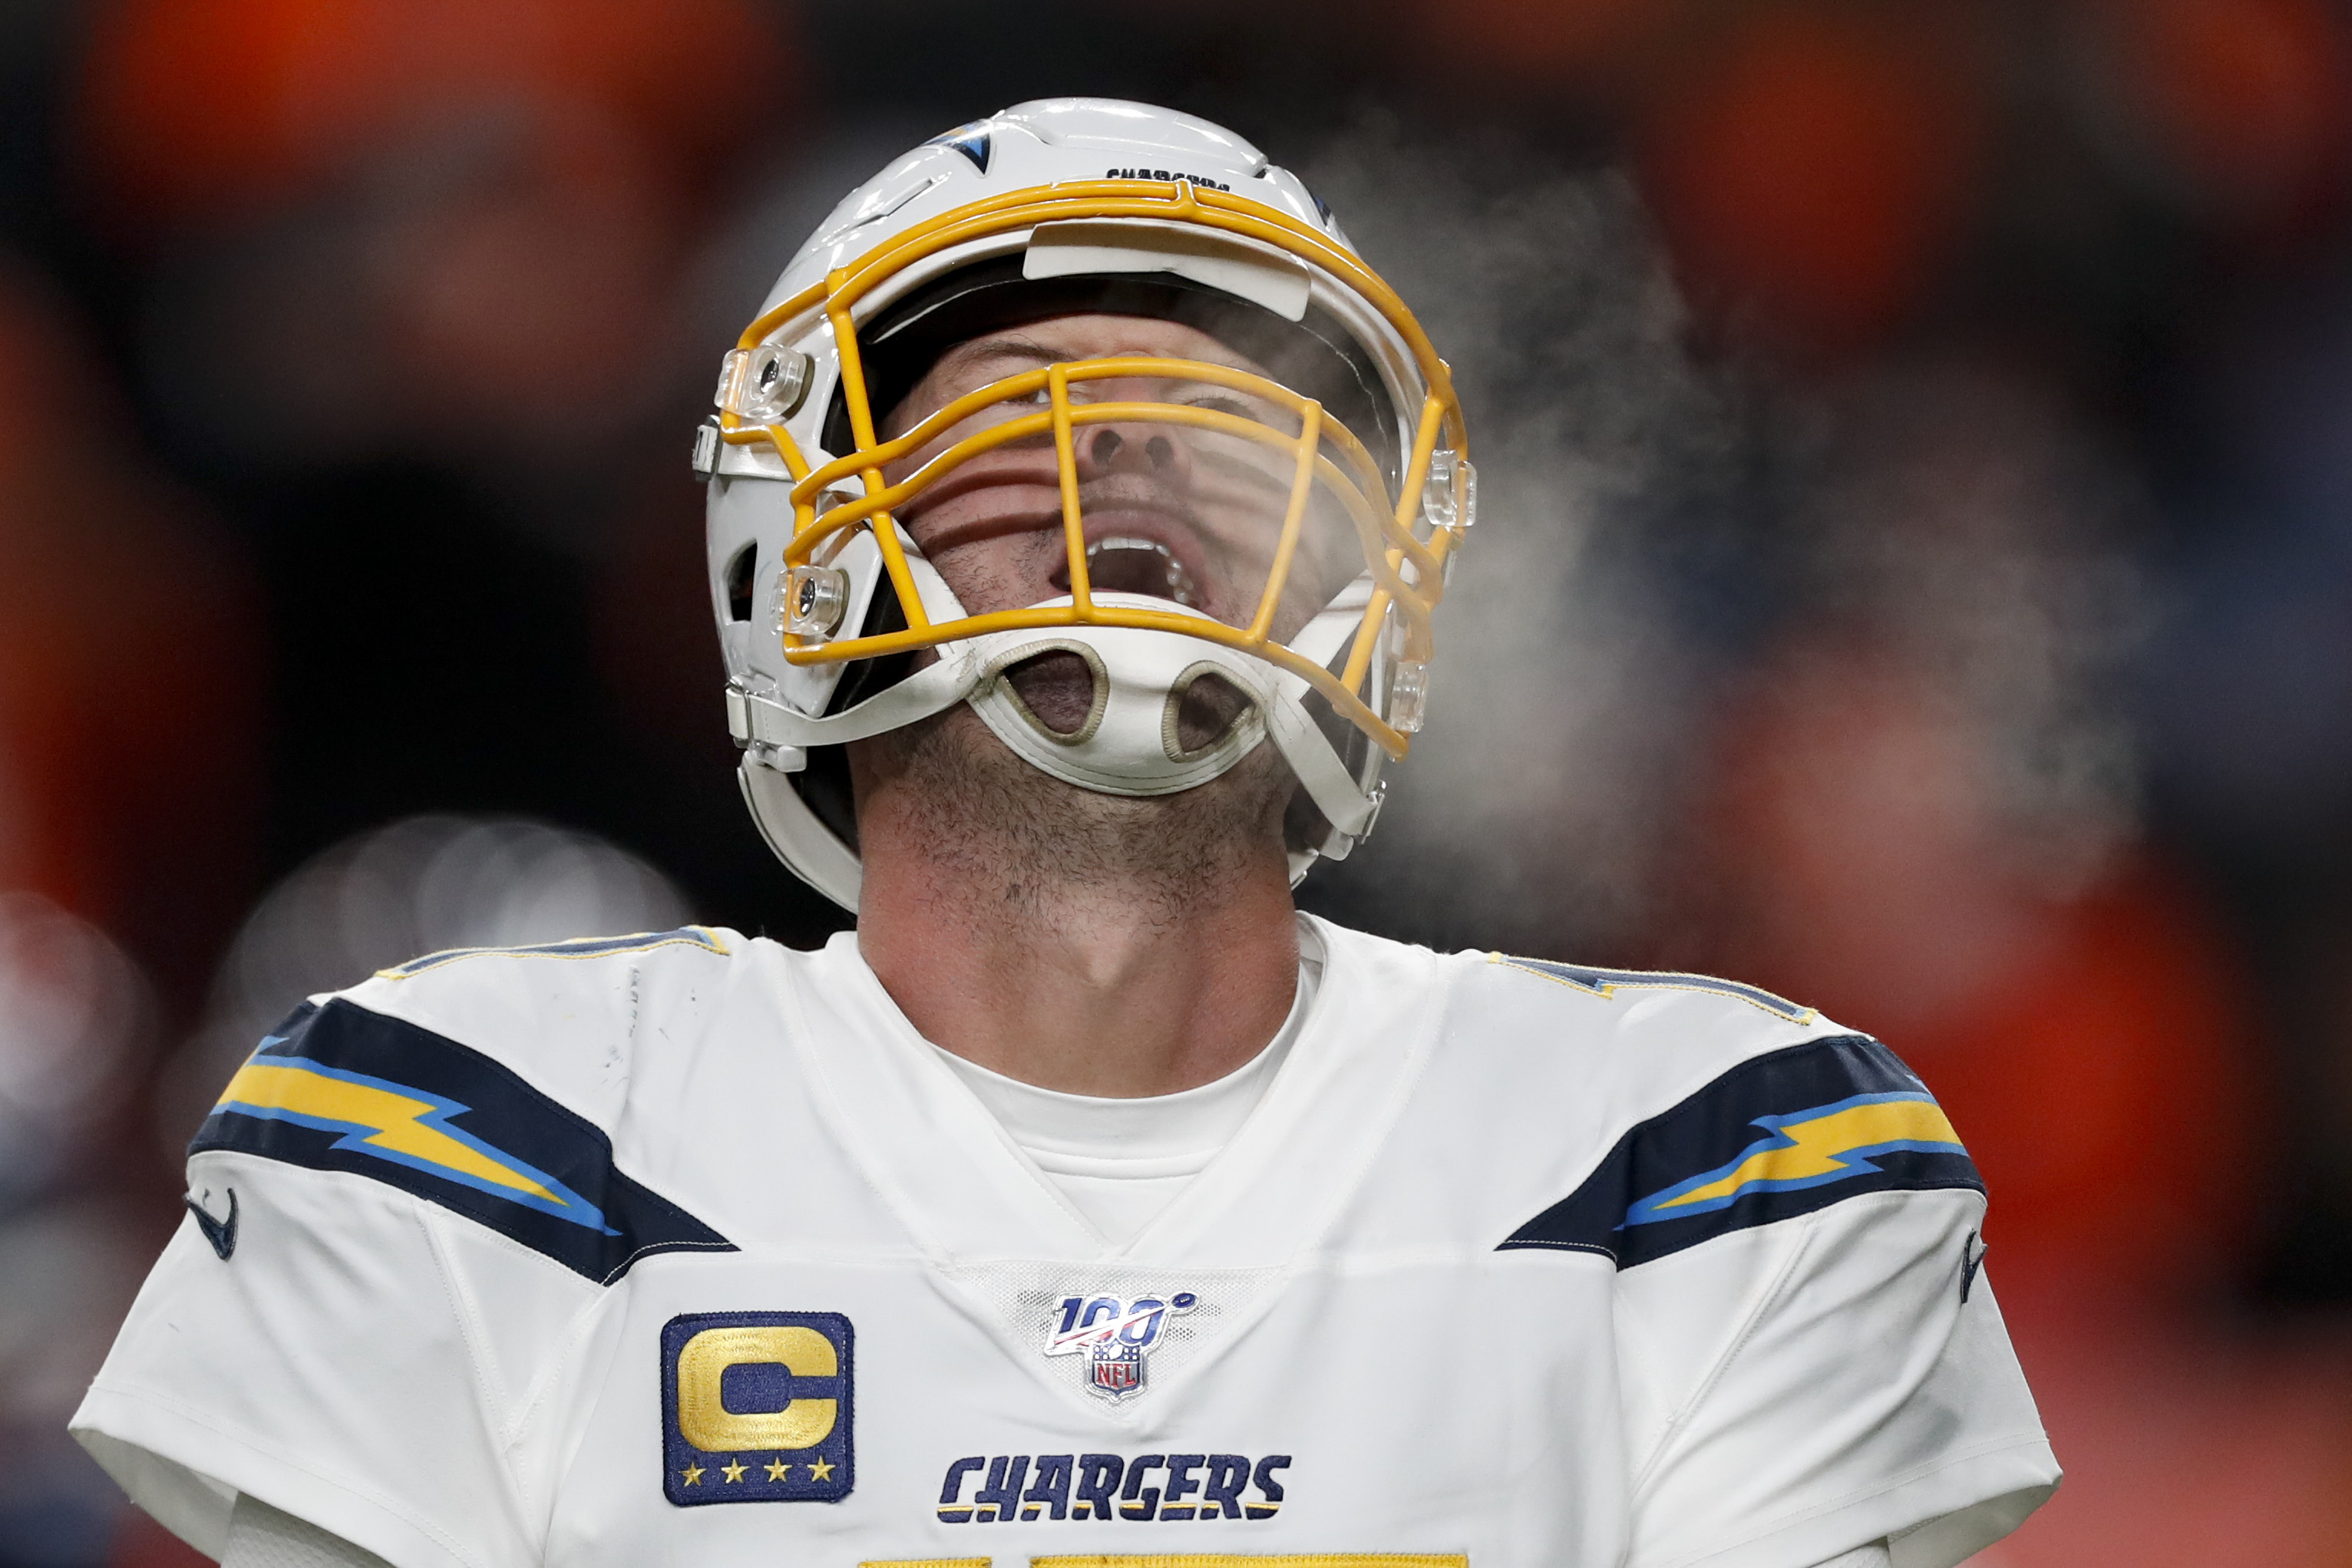 Chargers follow familiar script, drop another close game